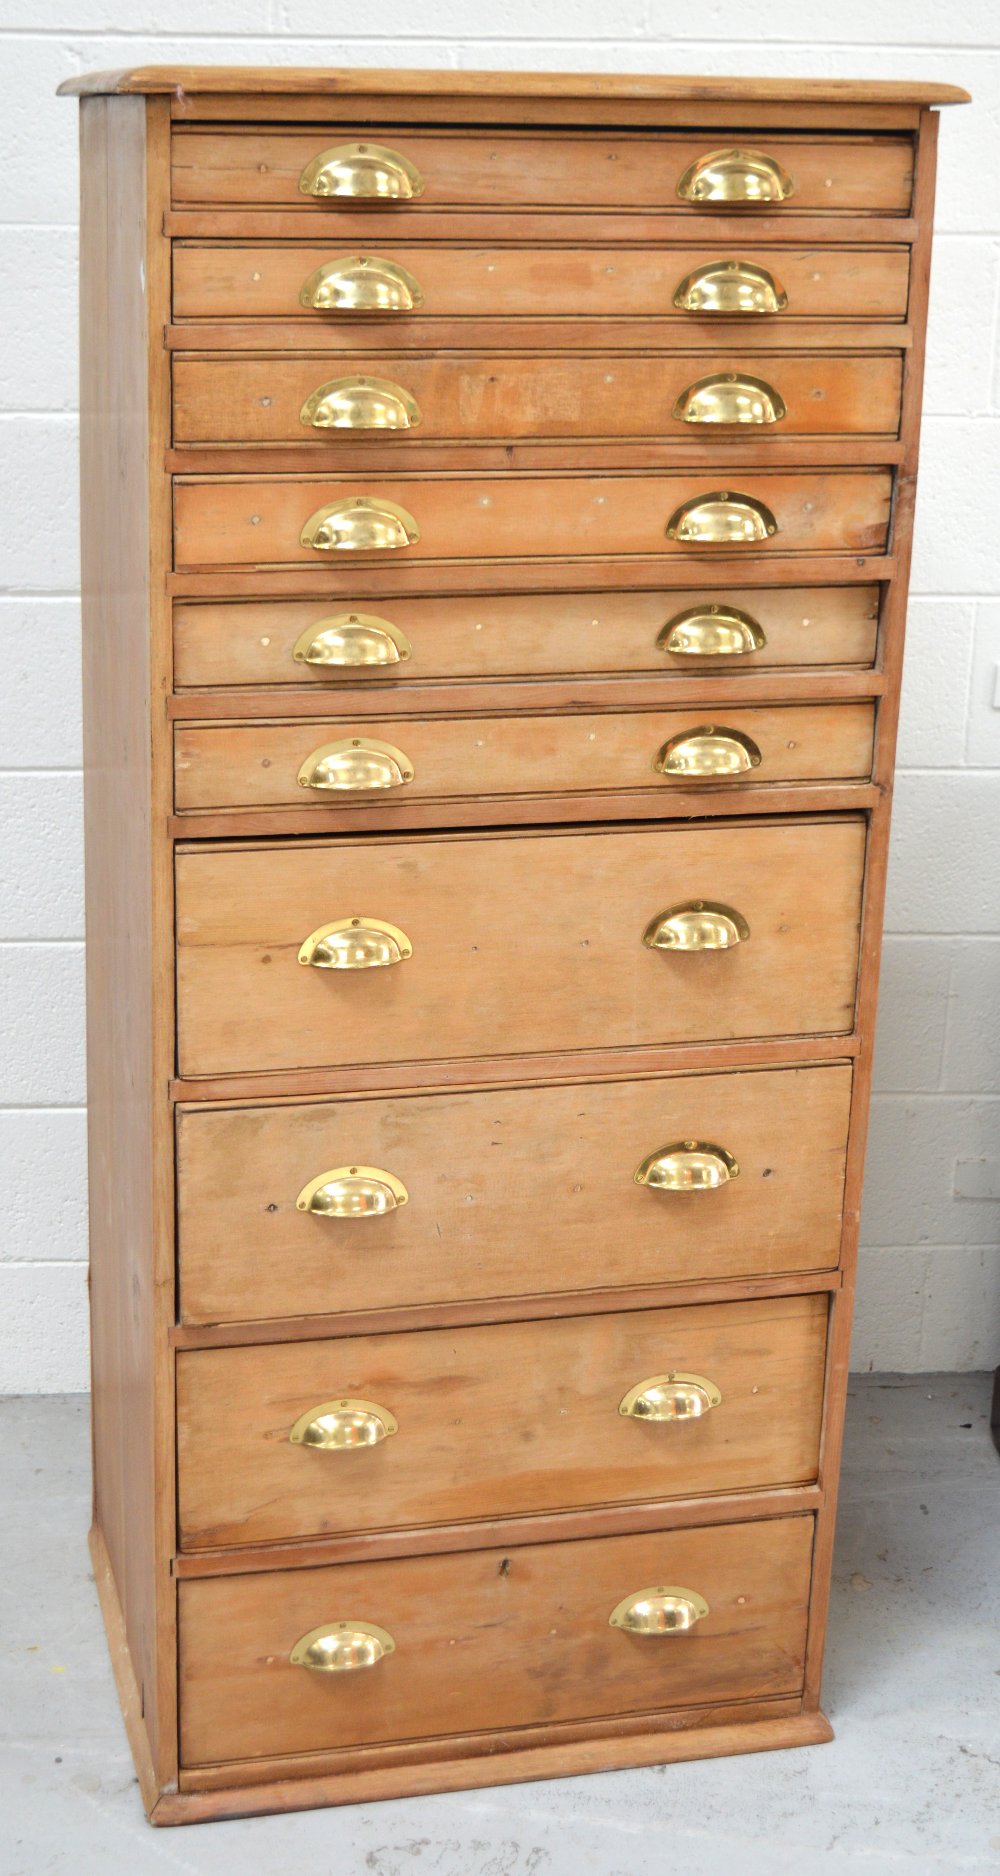 A c1900 pine bank of drawers,